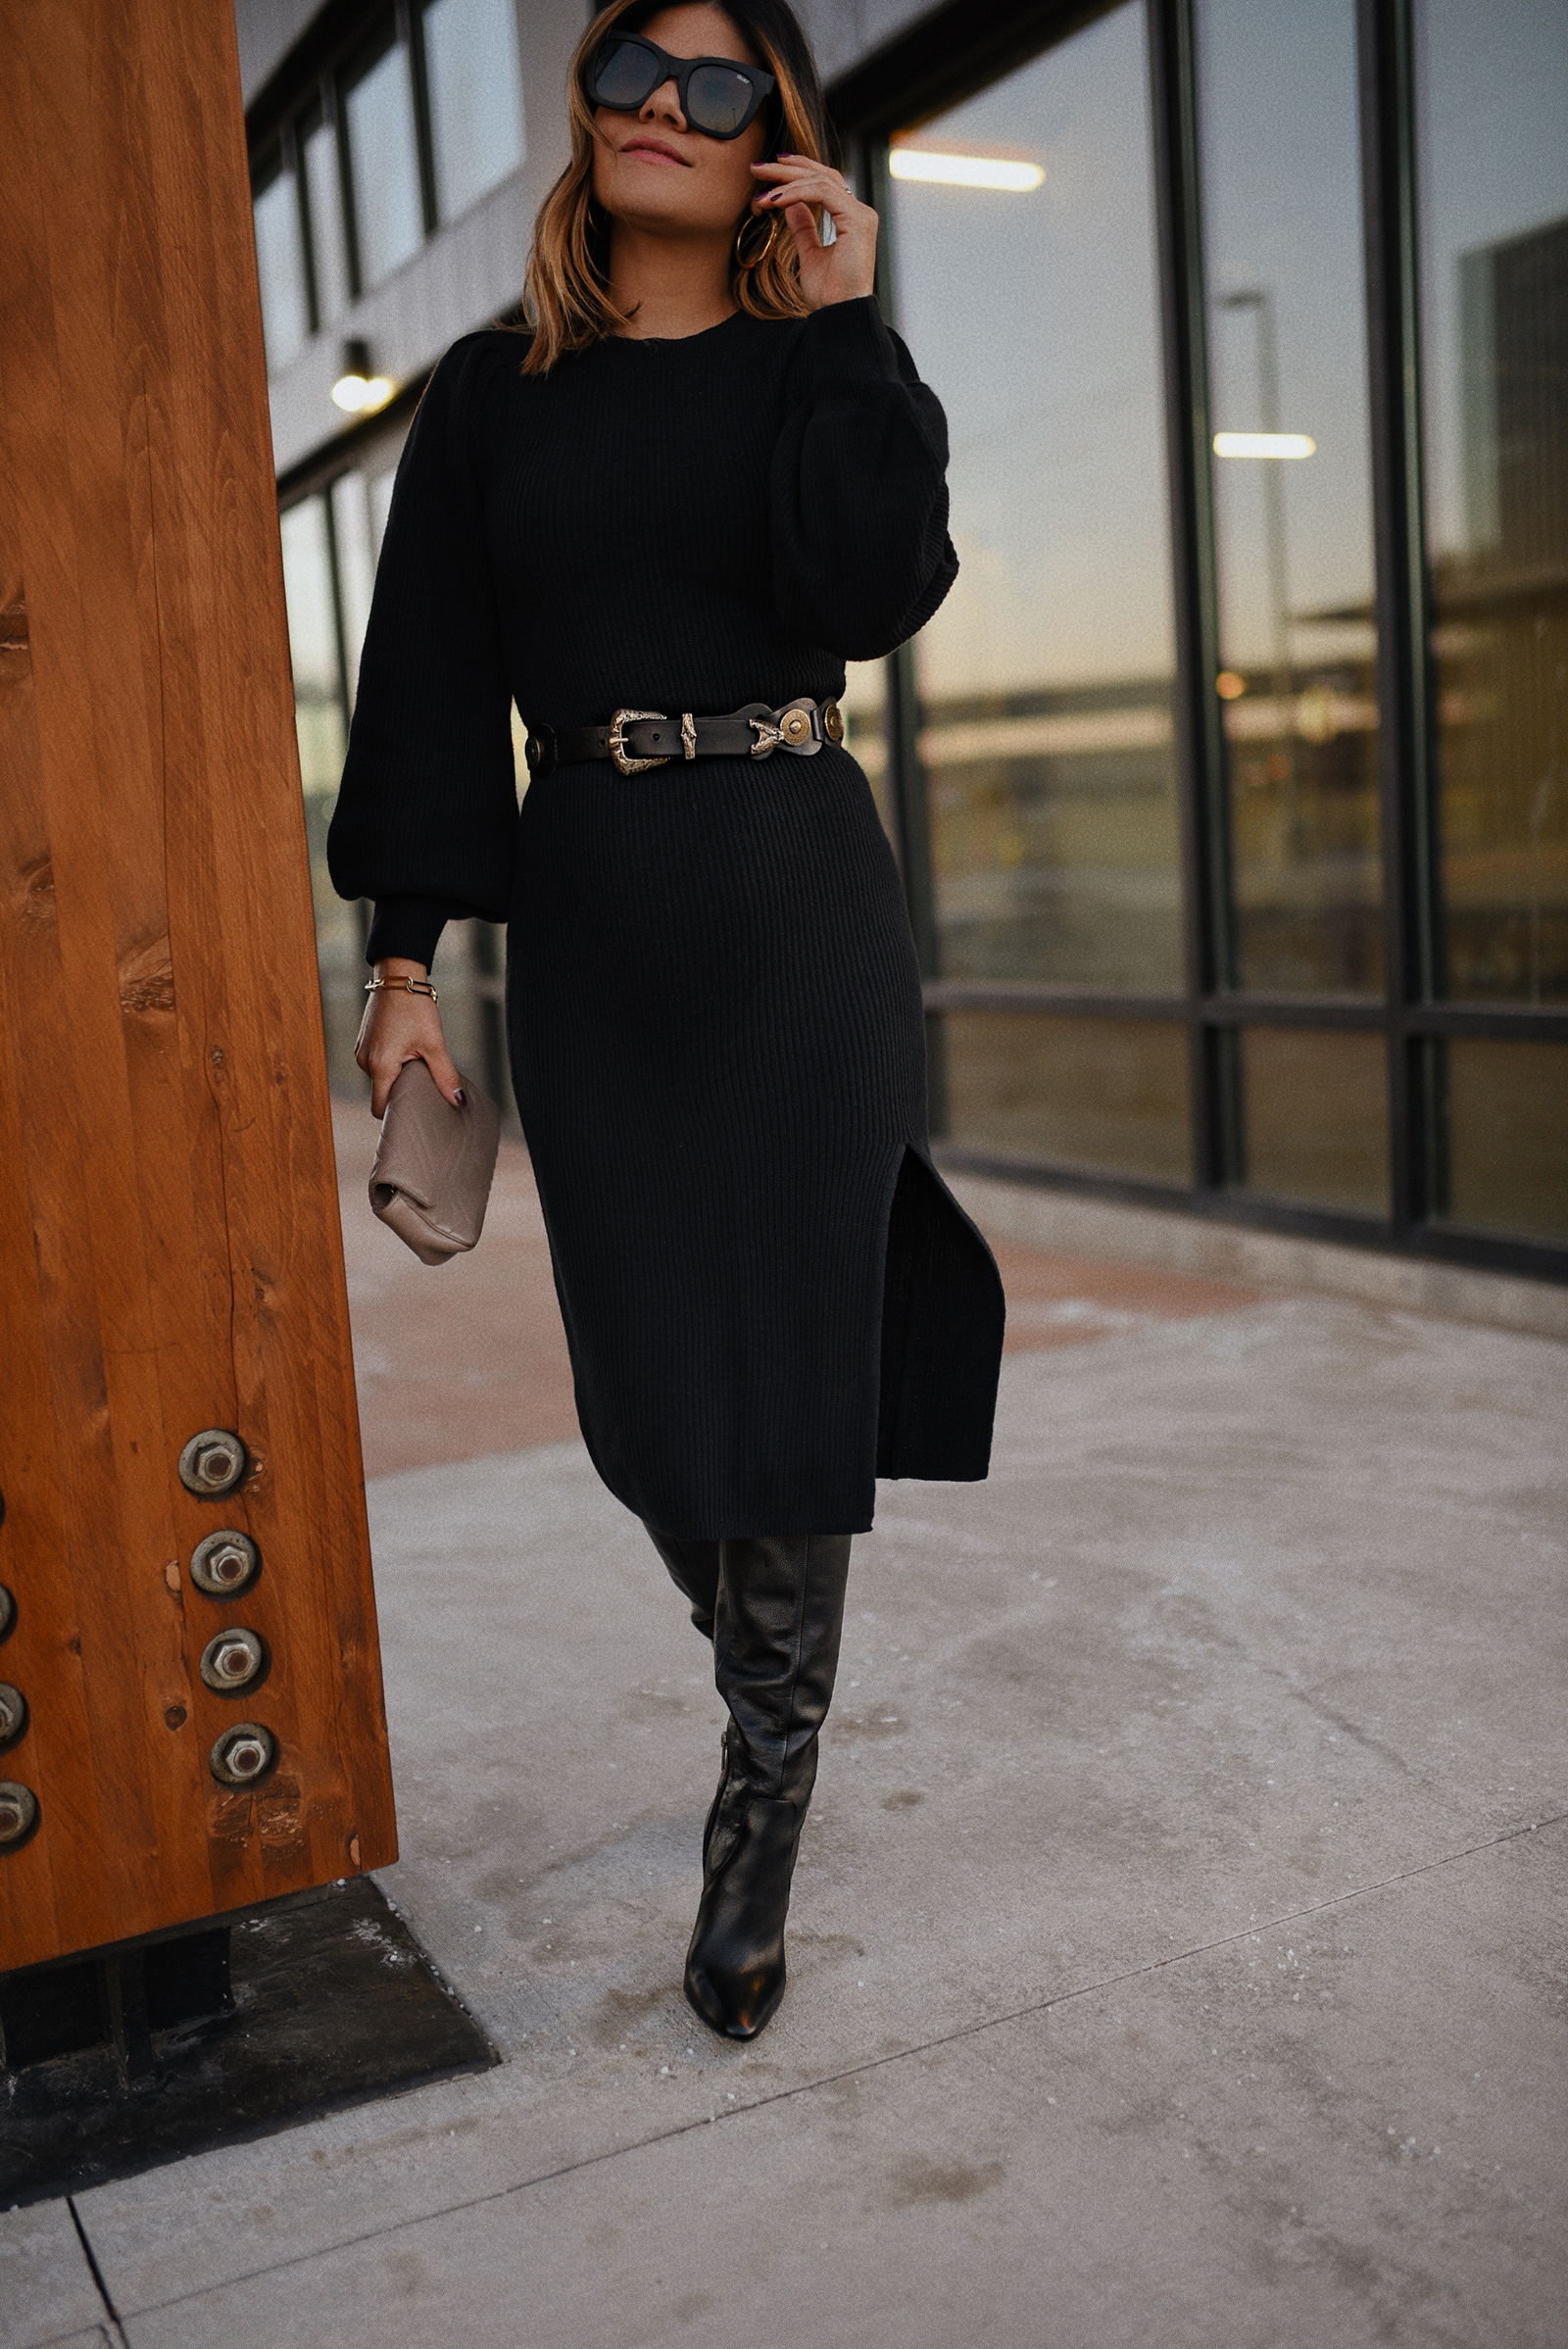 Carolina Hellal of Chic Talk wearing an Abercrombie Knit sweater dress, Vince Camuto Tall Black boots, QUAY sunglasses and Gucci crossbody bag.